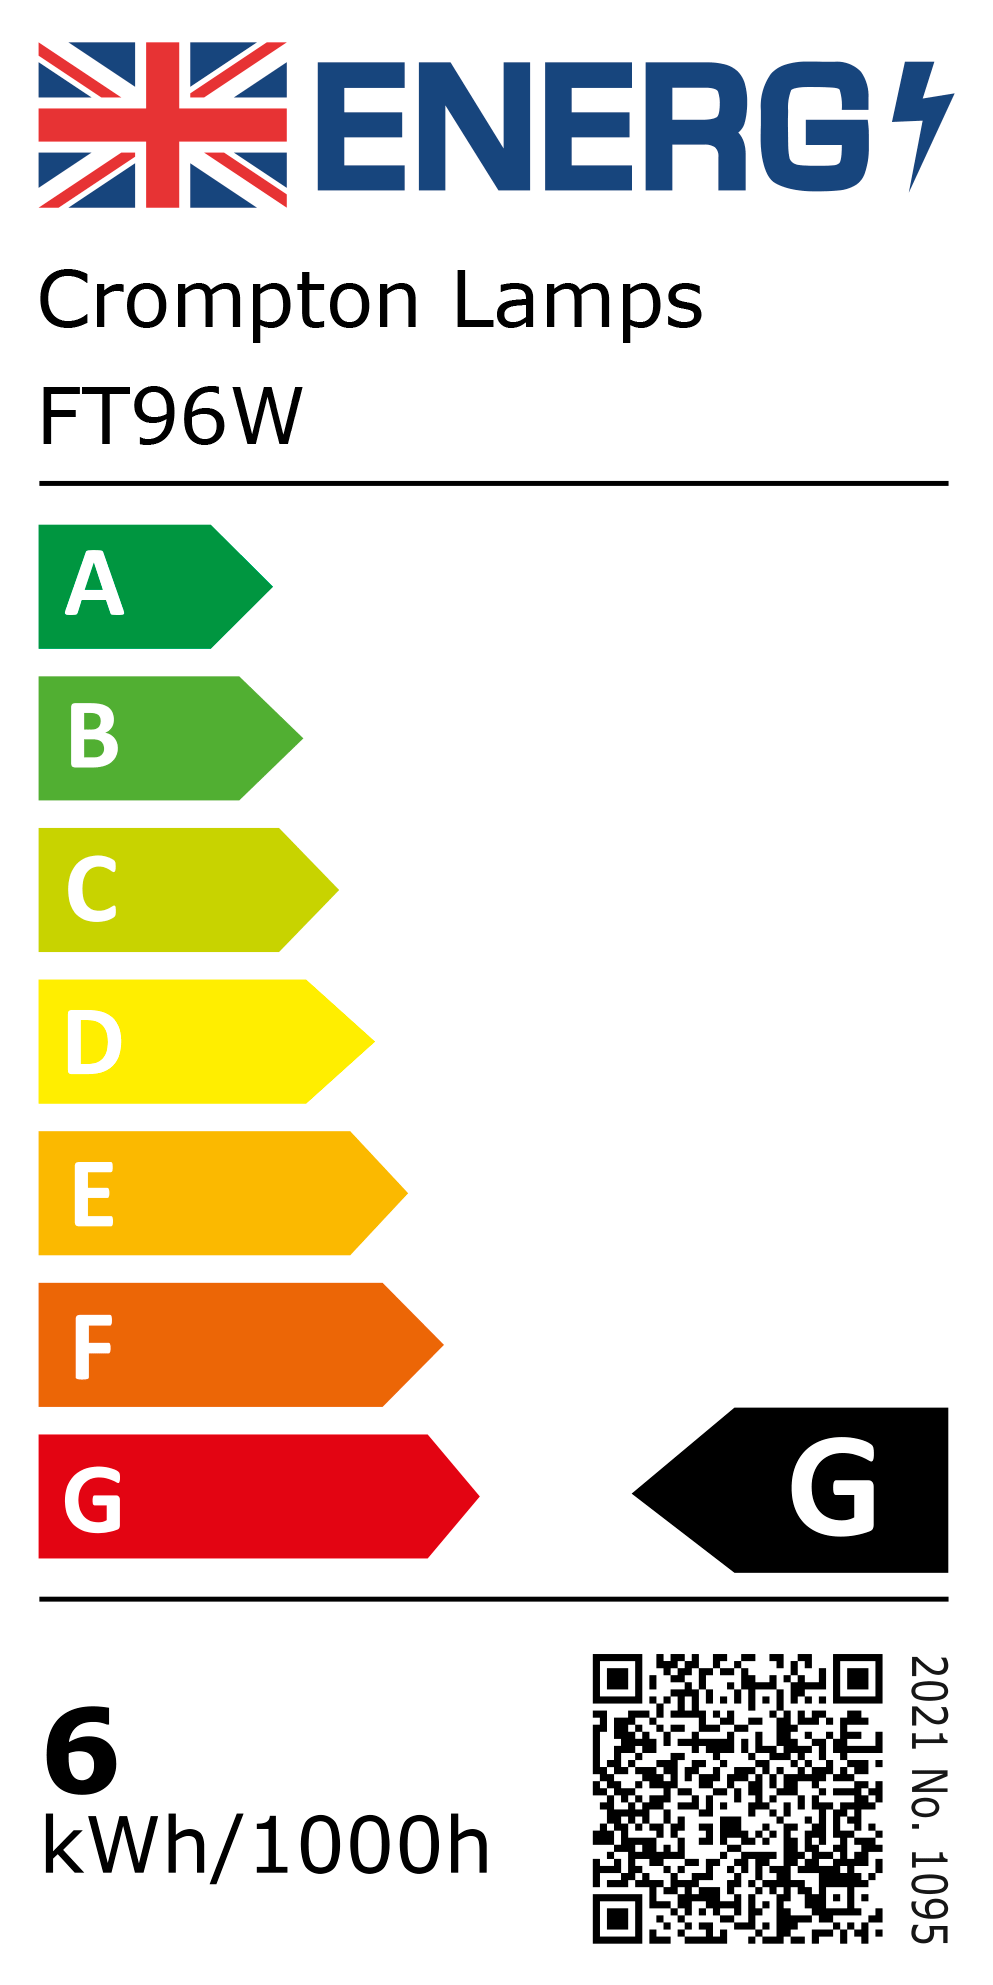 New 2021 Energy Rating Label: Stock Code FT96W